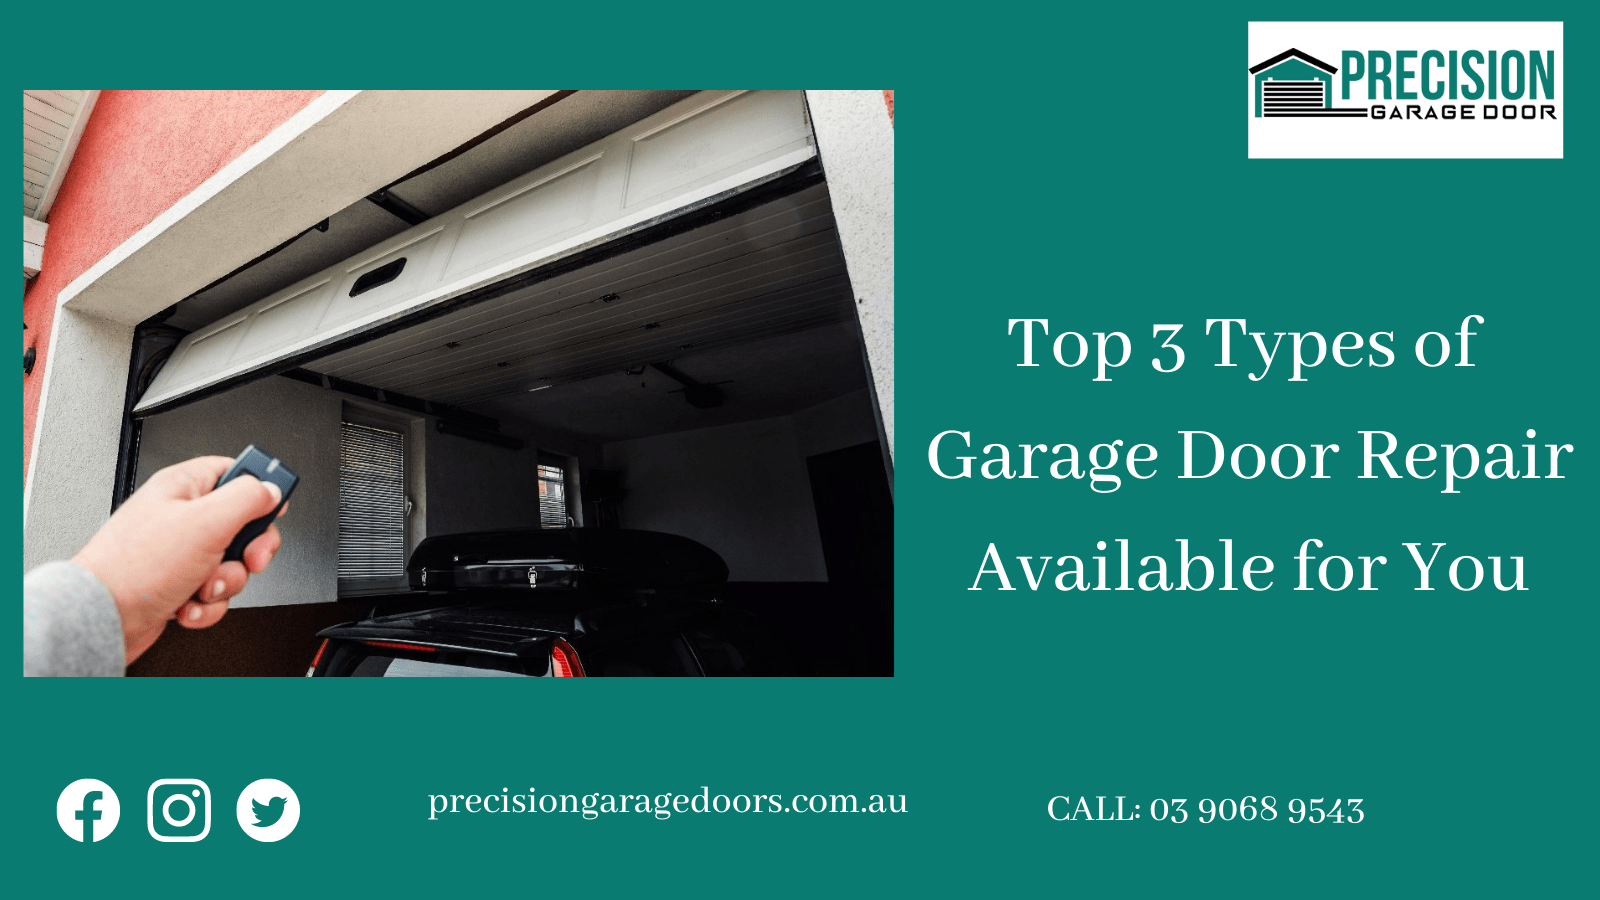 Top 3 Types of Garage Door Available for You